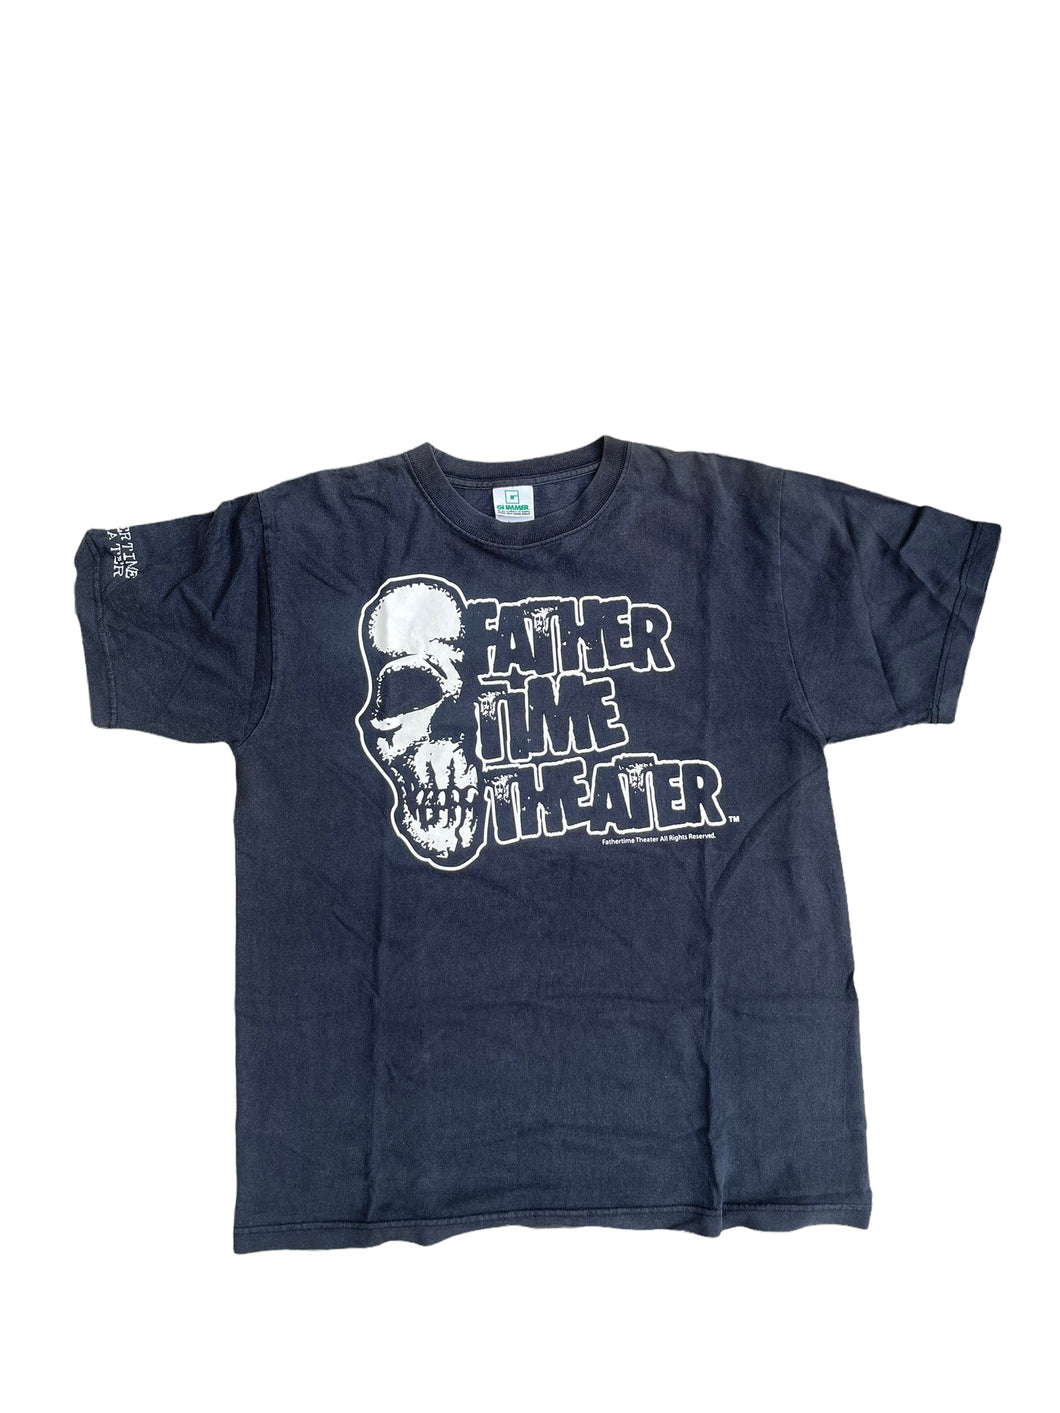 Fathertime Theater Vintage Band T-Shirt